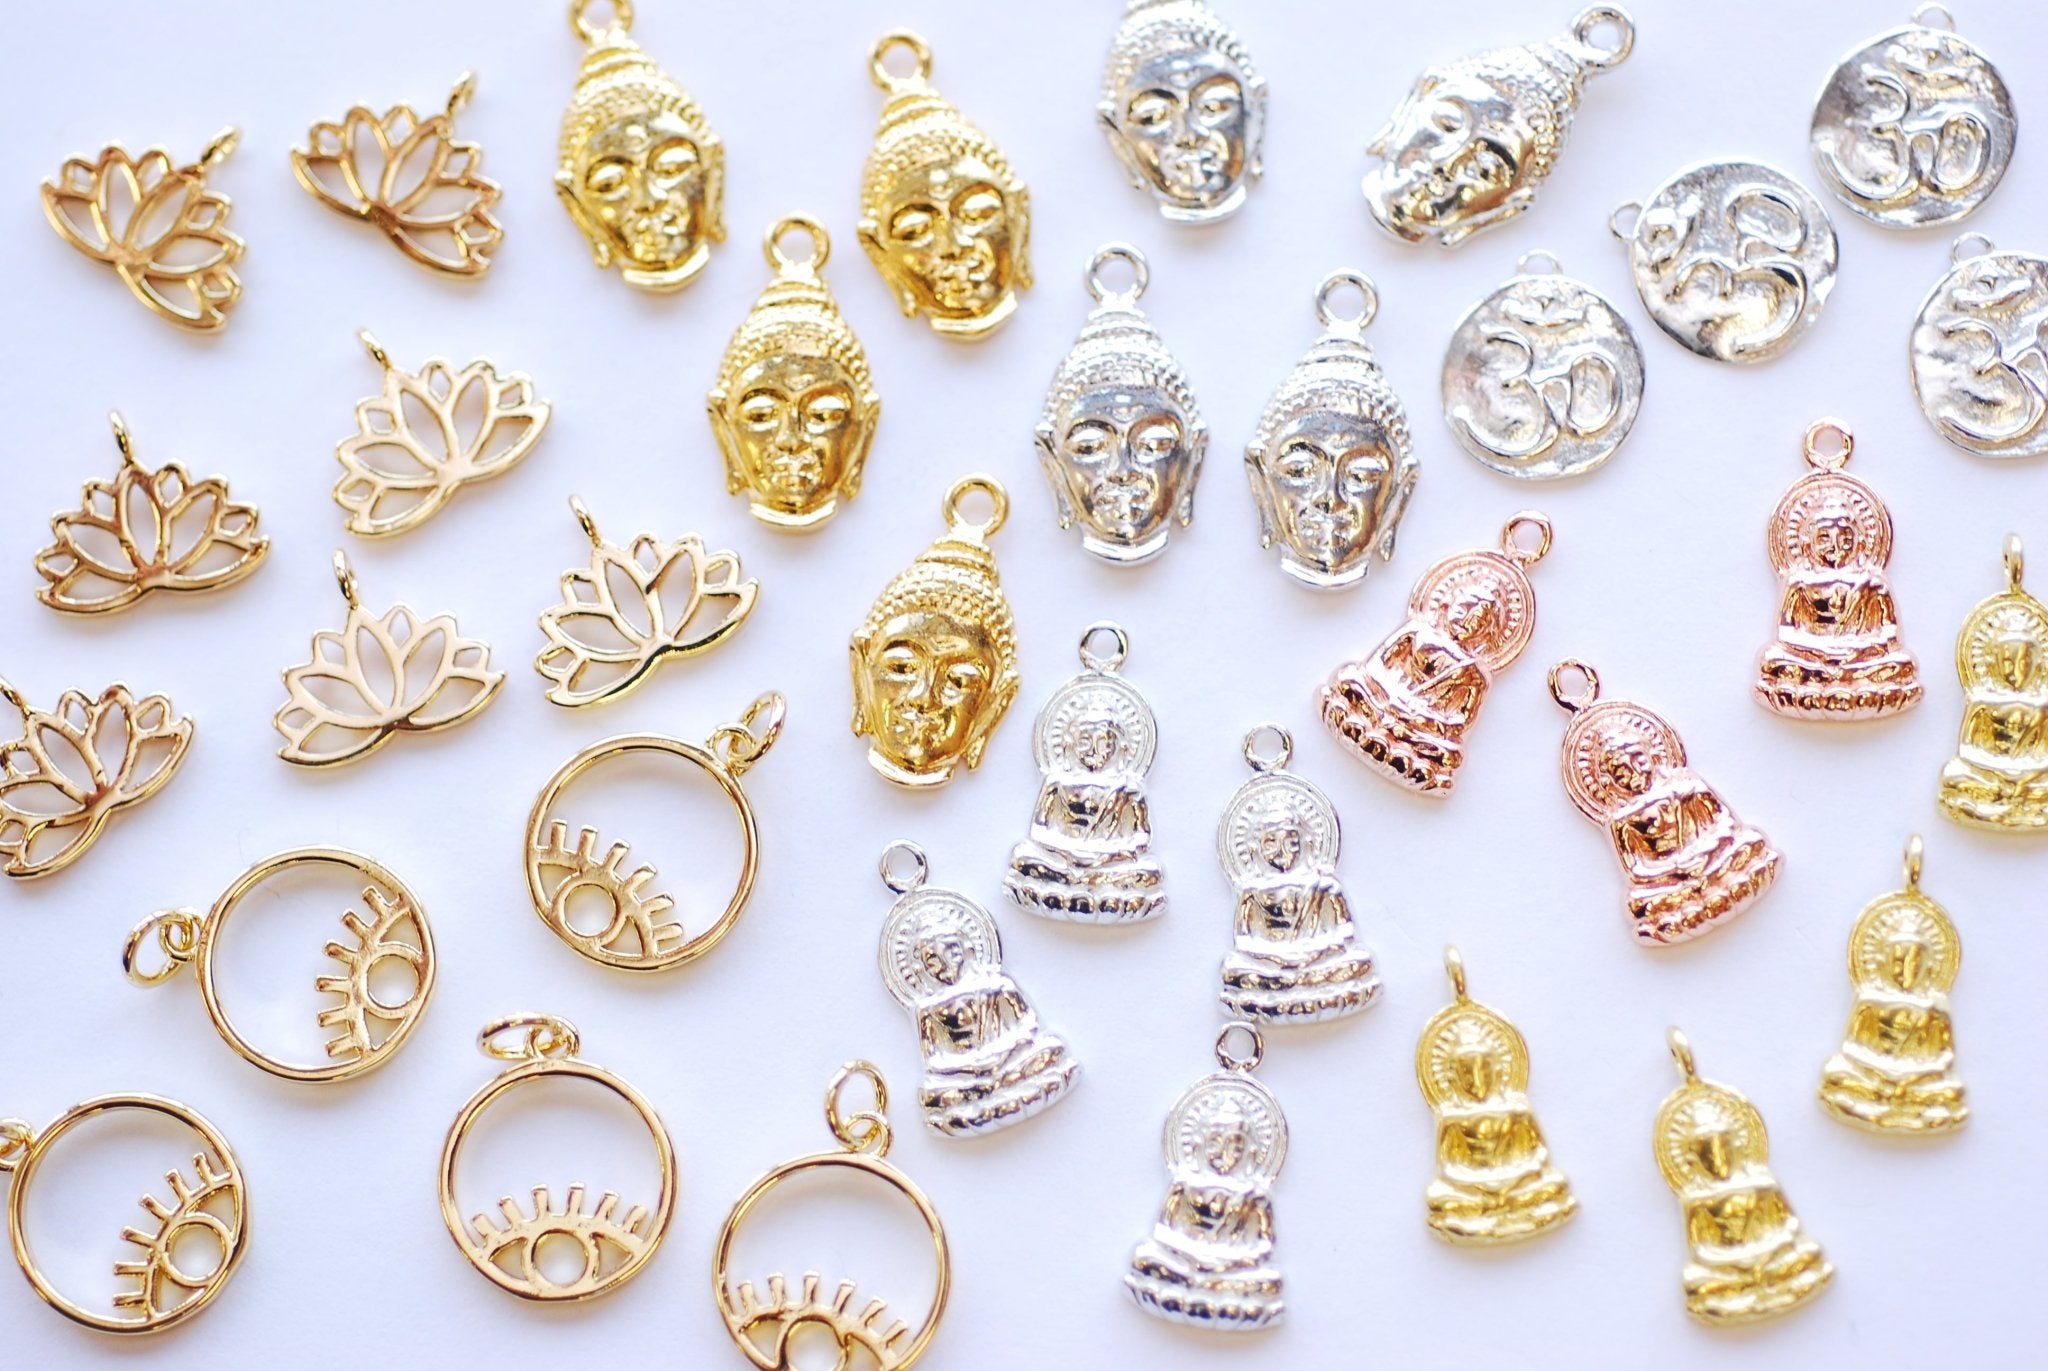 Wholesale Evil Eyes, Hamsa Hands, and Buddha Charms | 7 Must-Have Symbolic Charms - HarperCrown